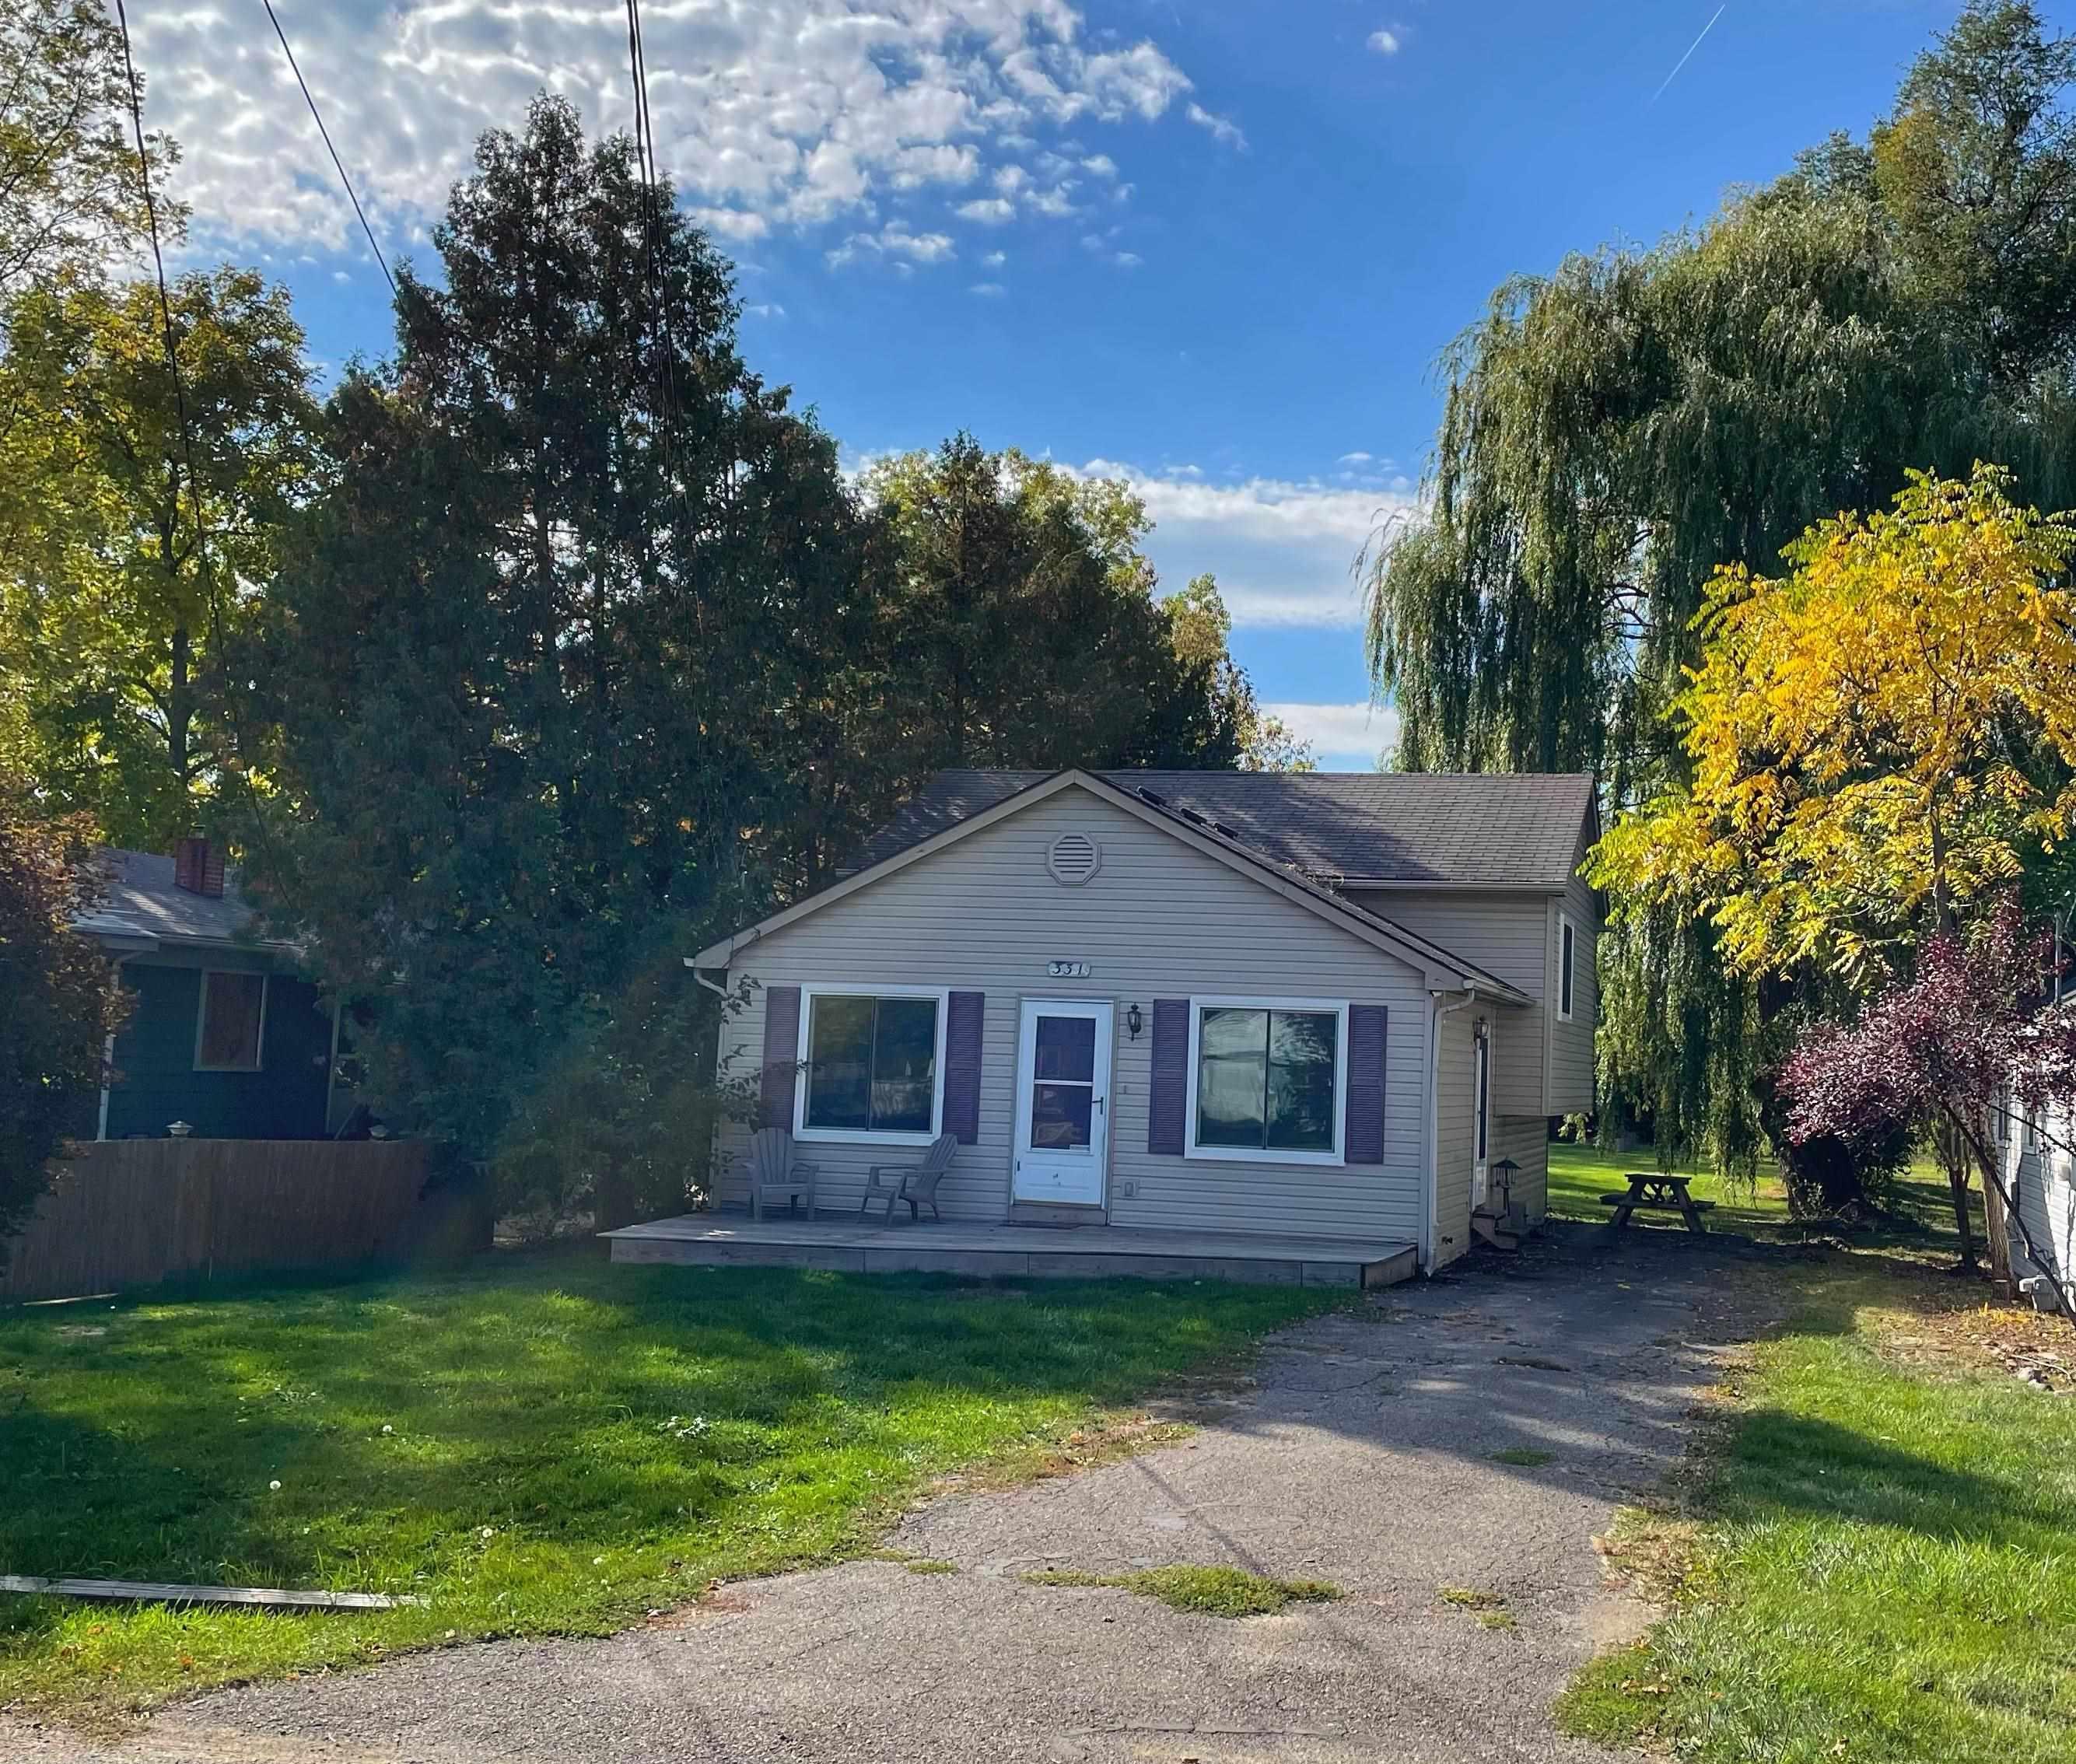 Built in 2002 this charming tri level is ready to move in! Huge 1/3 acre lot, 3 bedrooms, 2 full bath. Living room and Family rooms. Open  concept kitchen with island and Stainless appliances. Gas forced air Furnace with Central air, Washer and dryer included. Immediate occupancy!